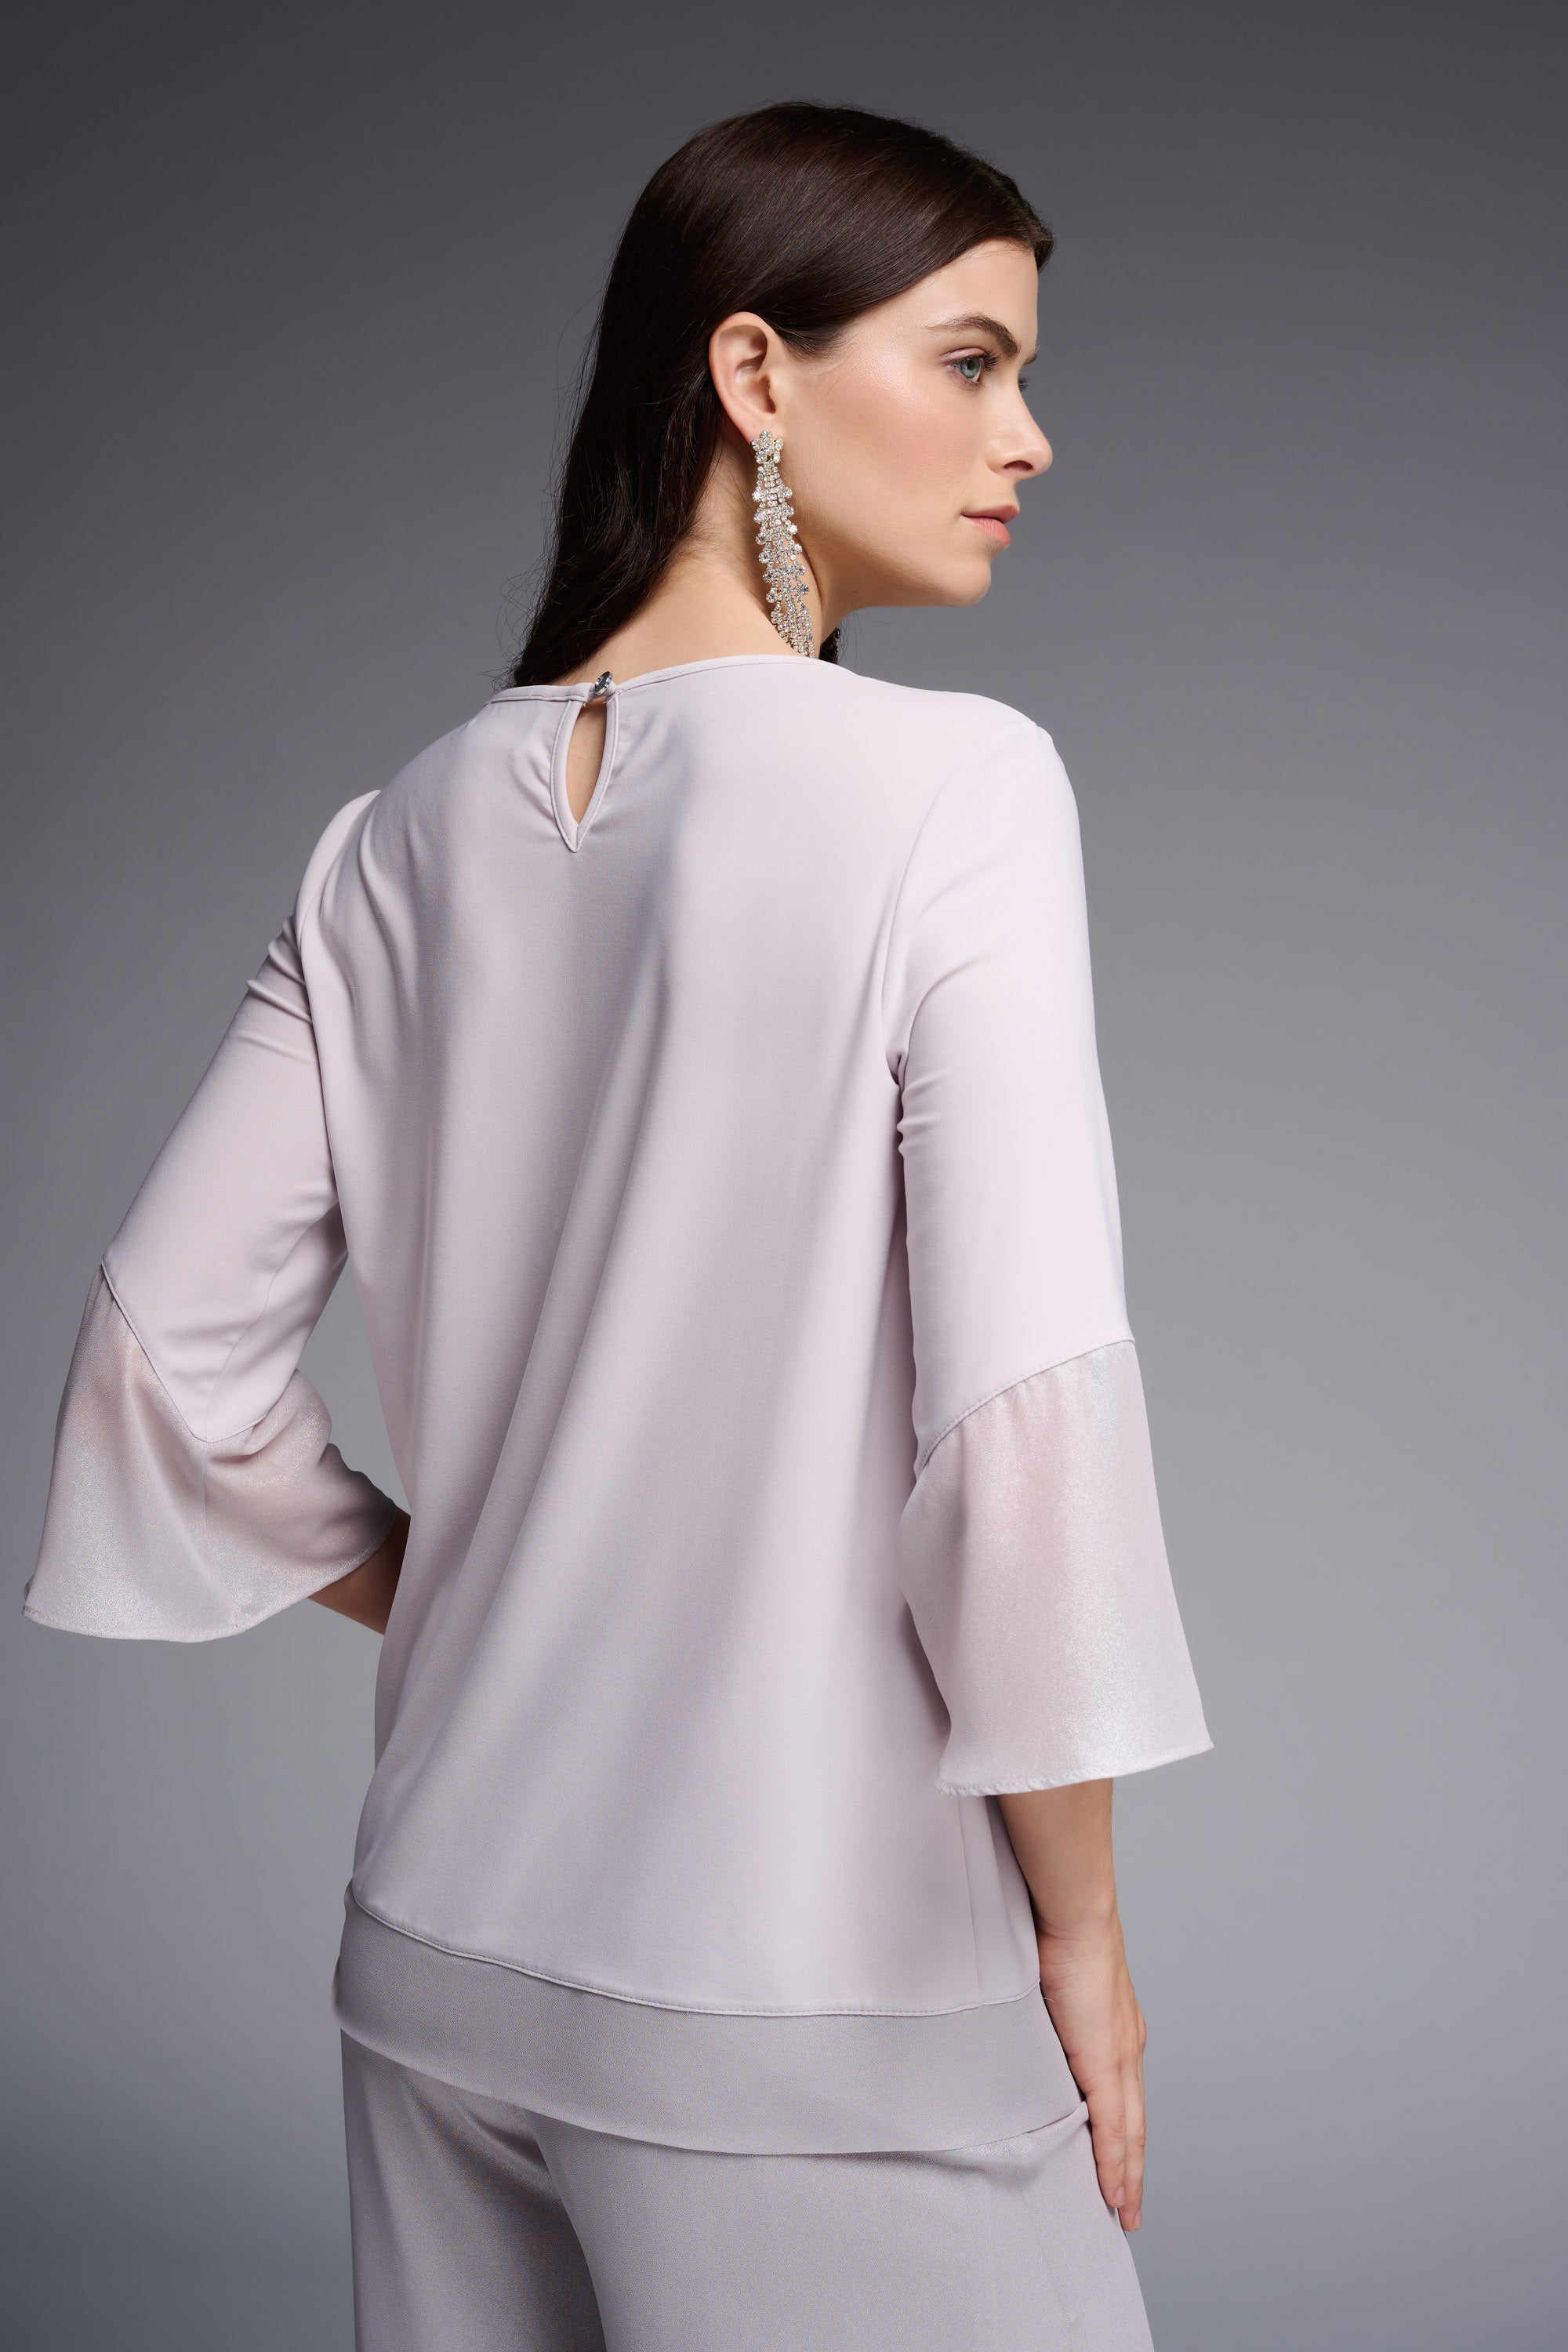 Chiffon Hem Top in Mother of Pearl 231739 - After Hours Boutique